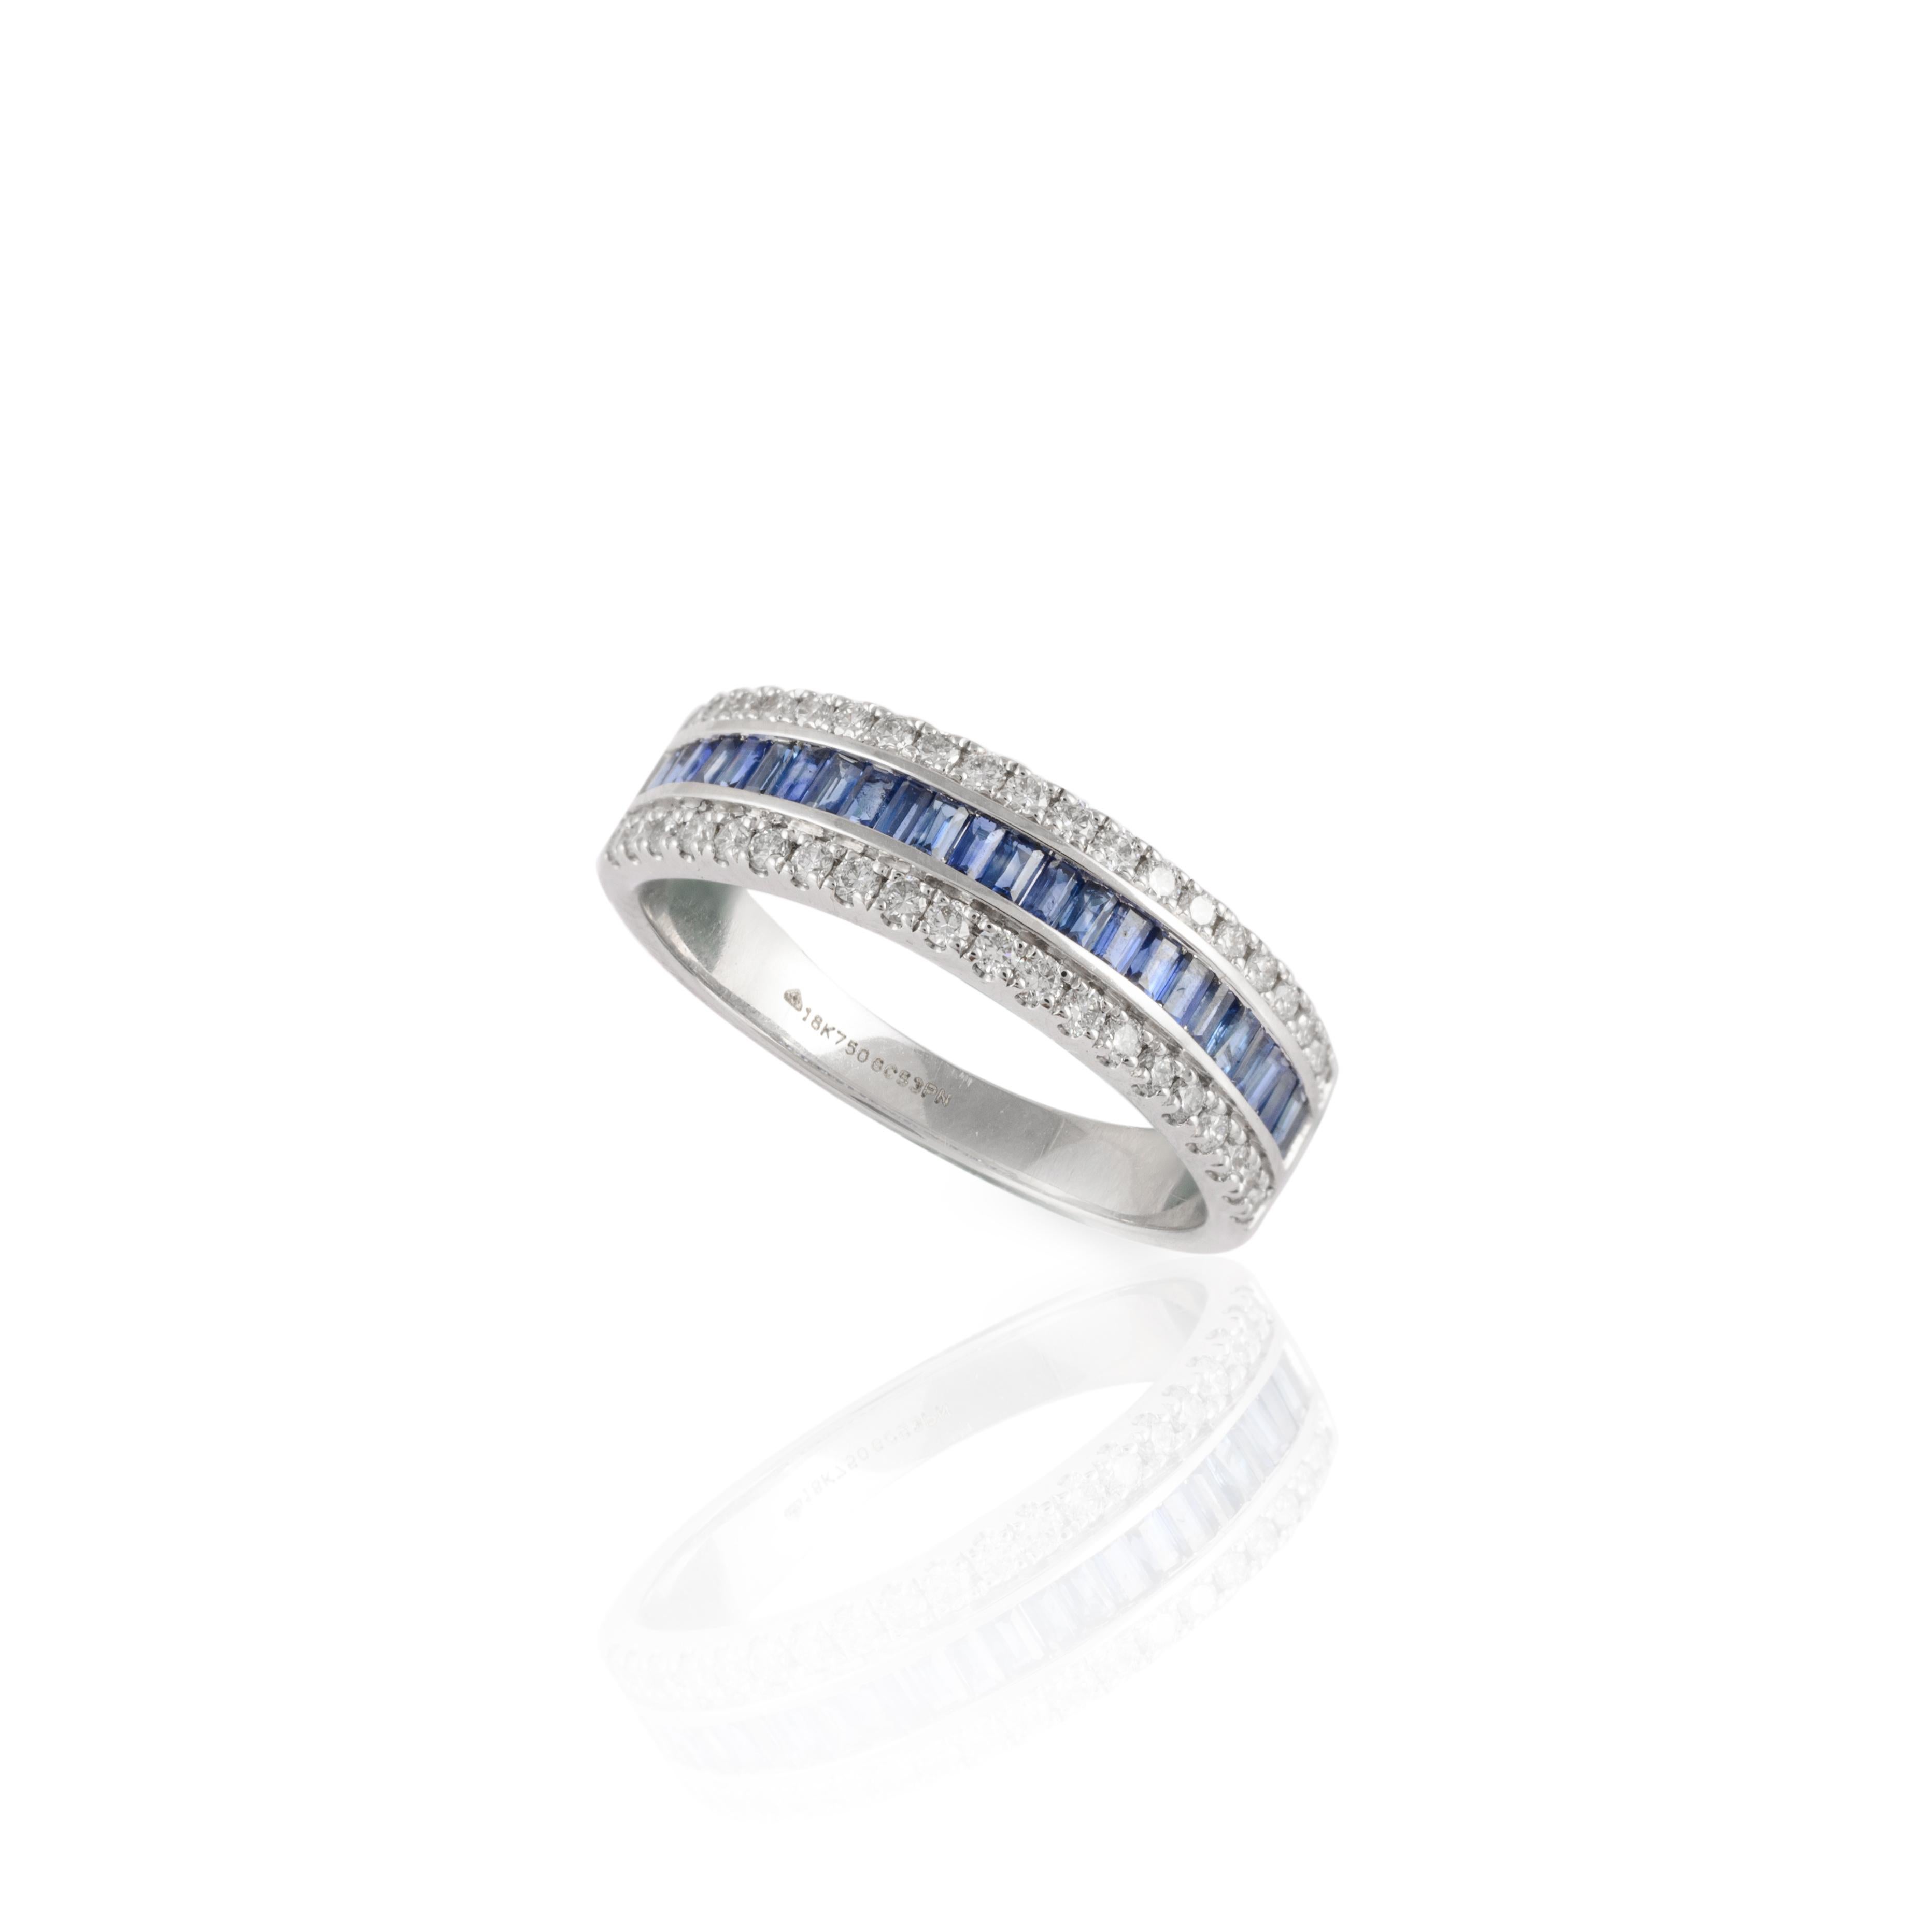 For Sale:  Natural Blue Sapphire Diamond Wedding Ring Crafted in 18k Solid White Gold 7